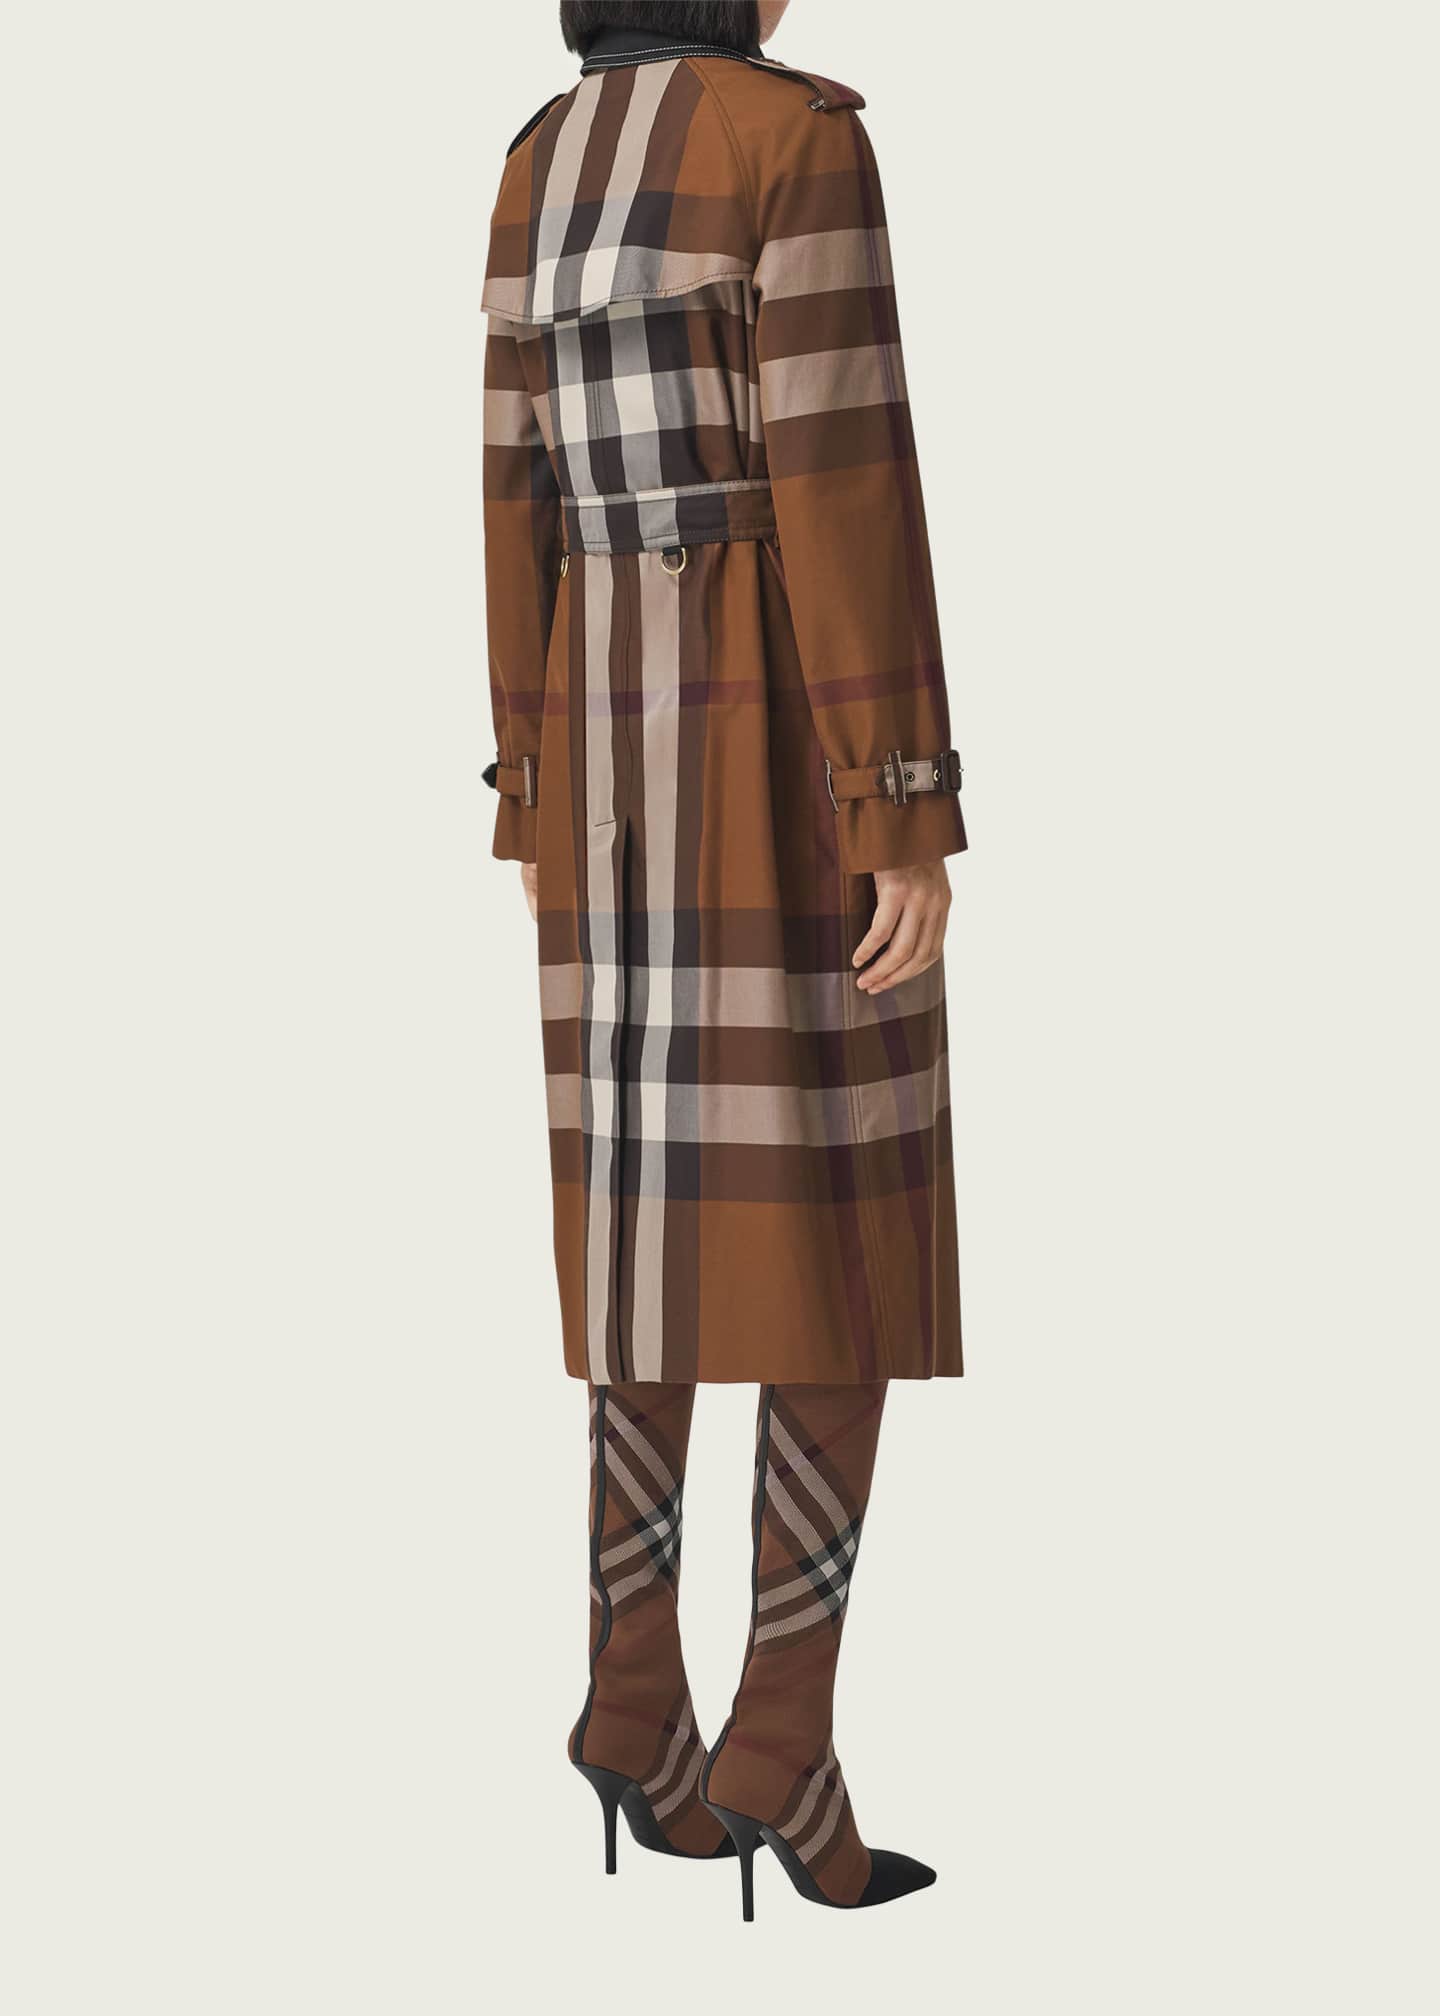 Burberry Waterloo Check-Print Double-Breasted Trench Coat - Bergdorf ...